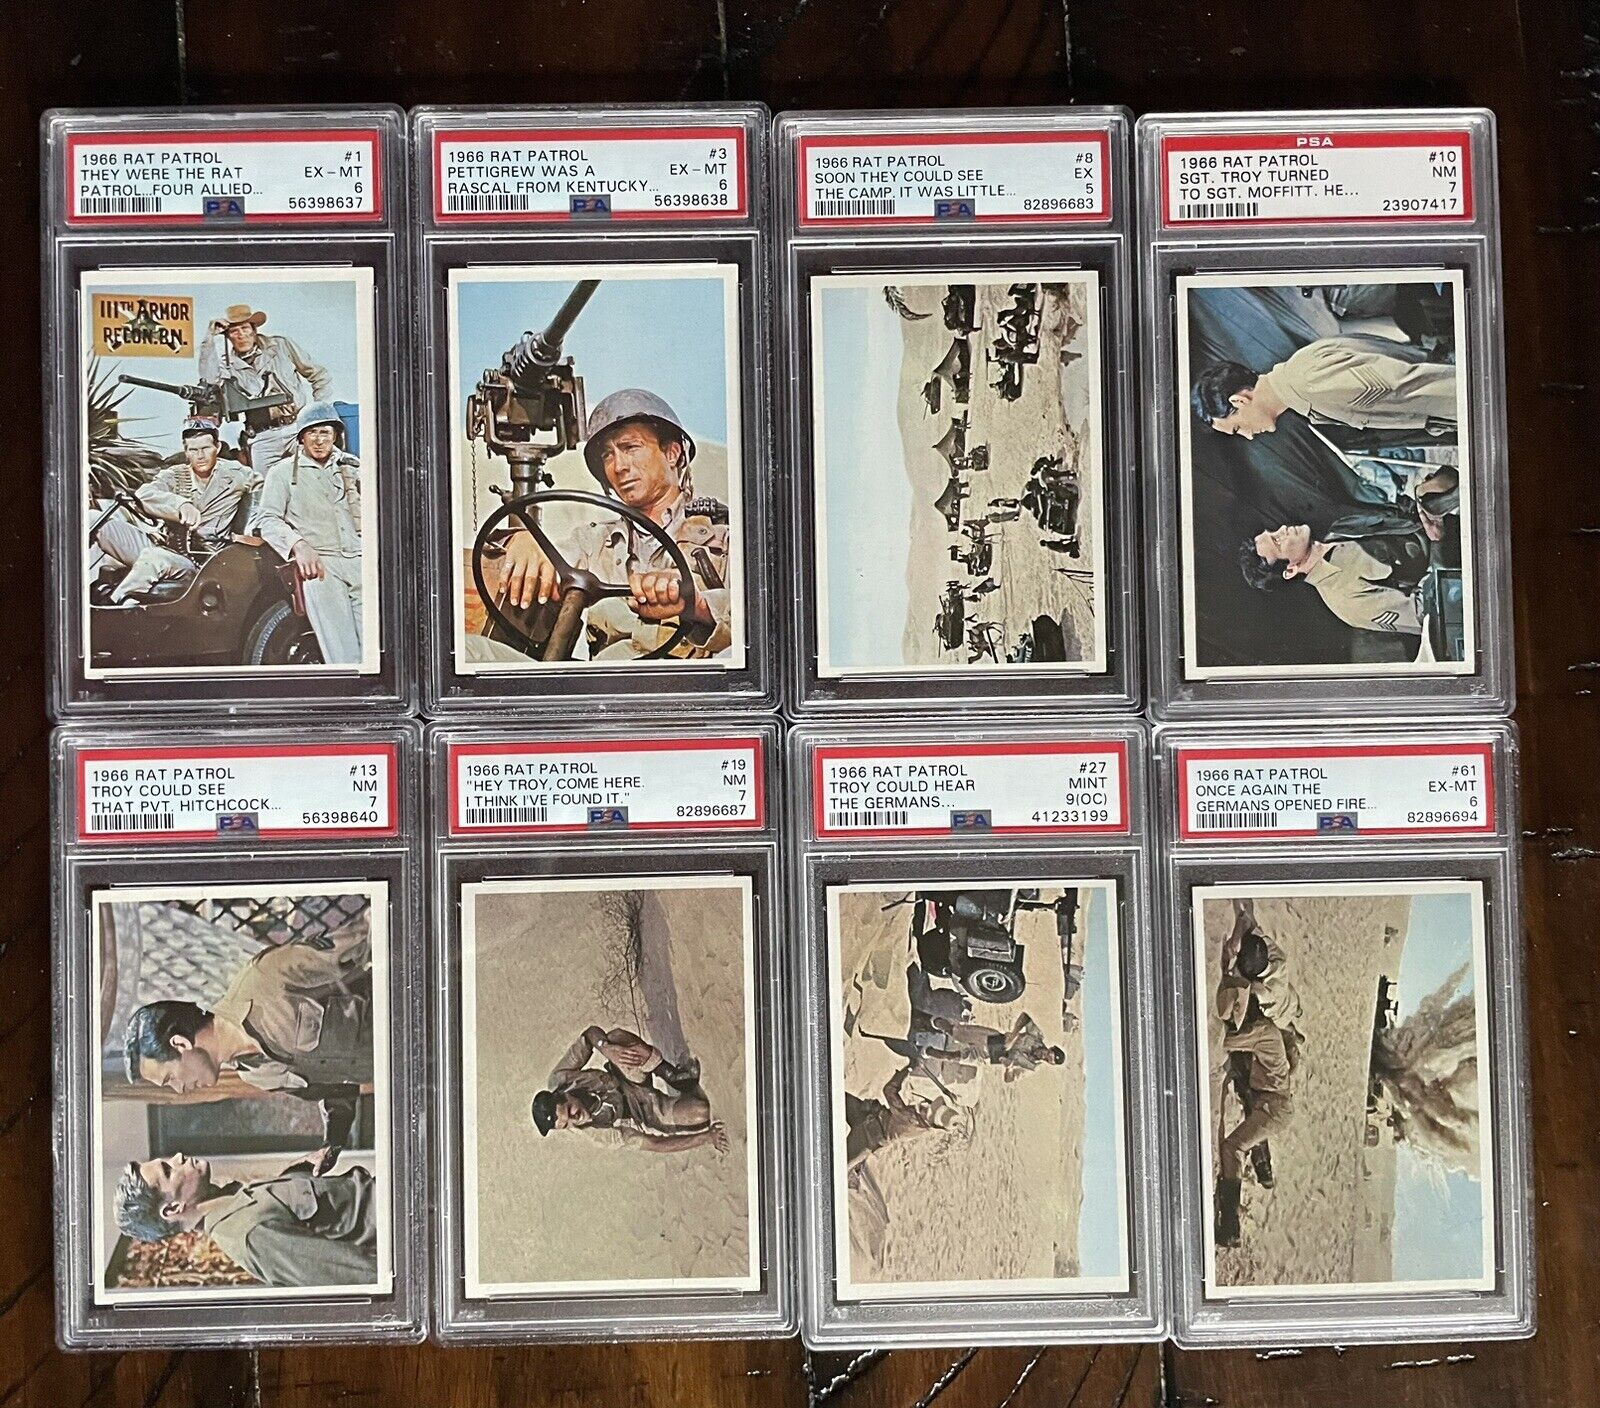 1966 RAT PATROL - 8 Different Cards - All PSA GRADED - Includes #1